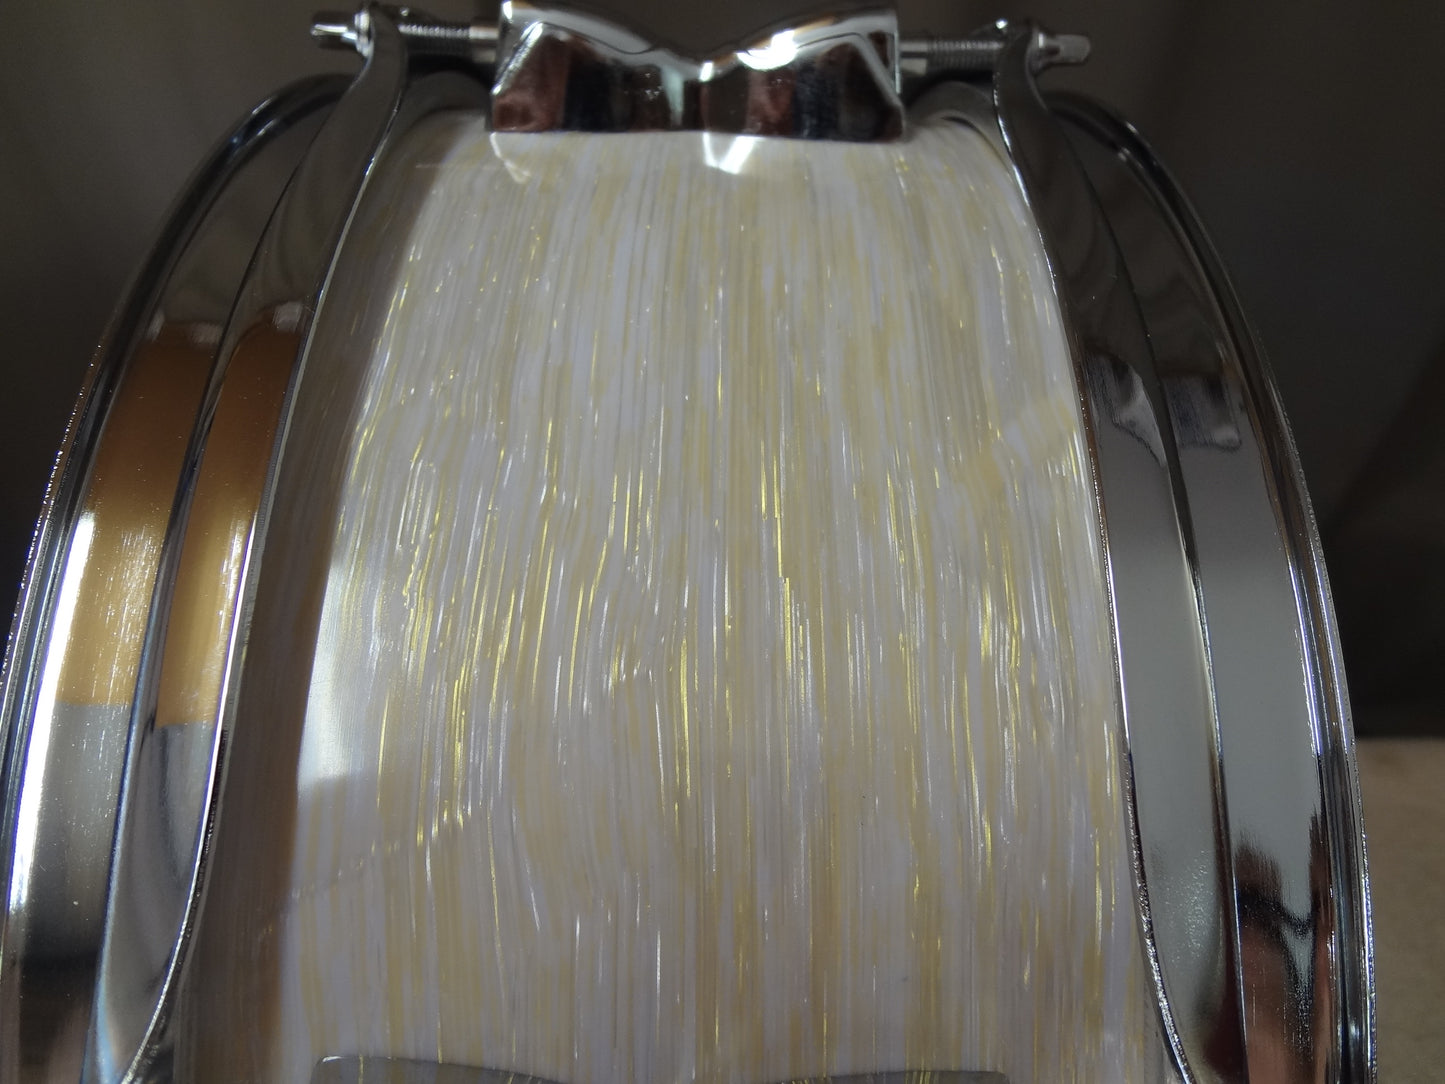 New 13 Inch Custom Electronic Snare Drum - Gold/White Swish